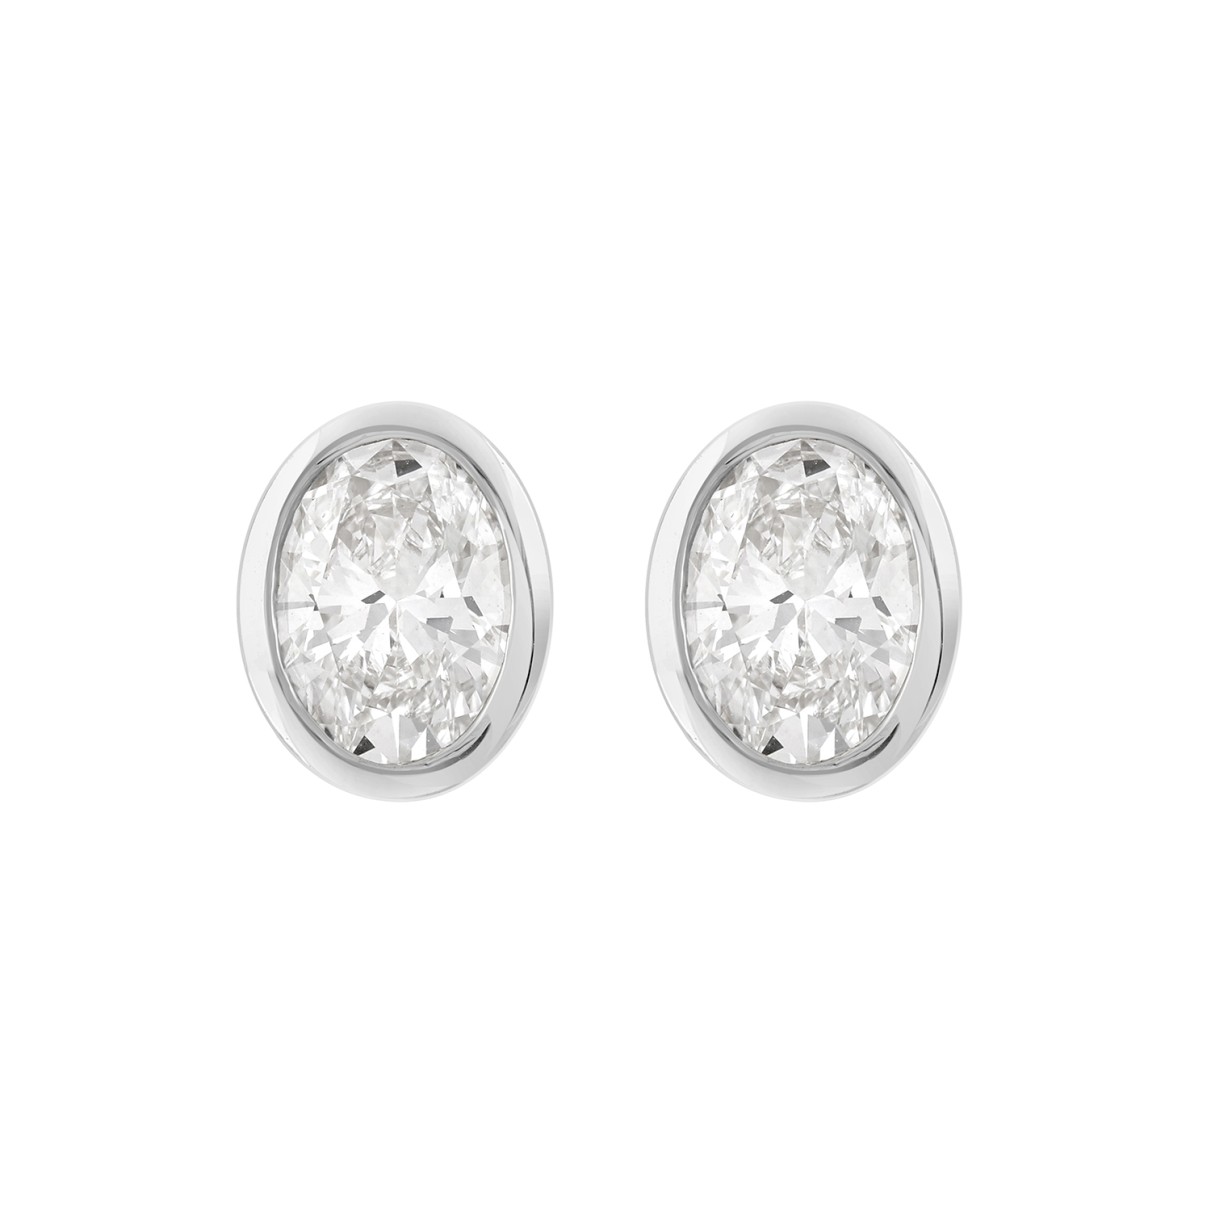 LADIES SOLITAIRE EARRING 2CT OVAL DIAMOND 14K WHIT...